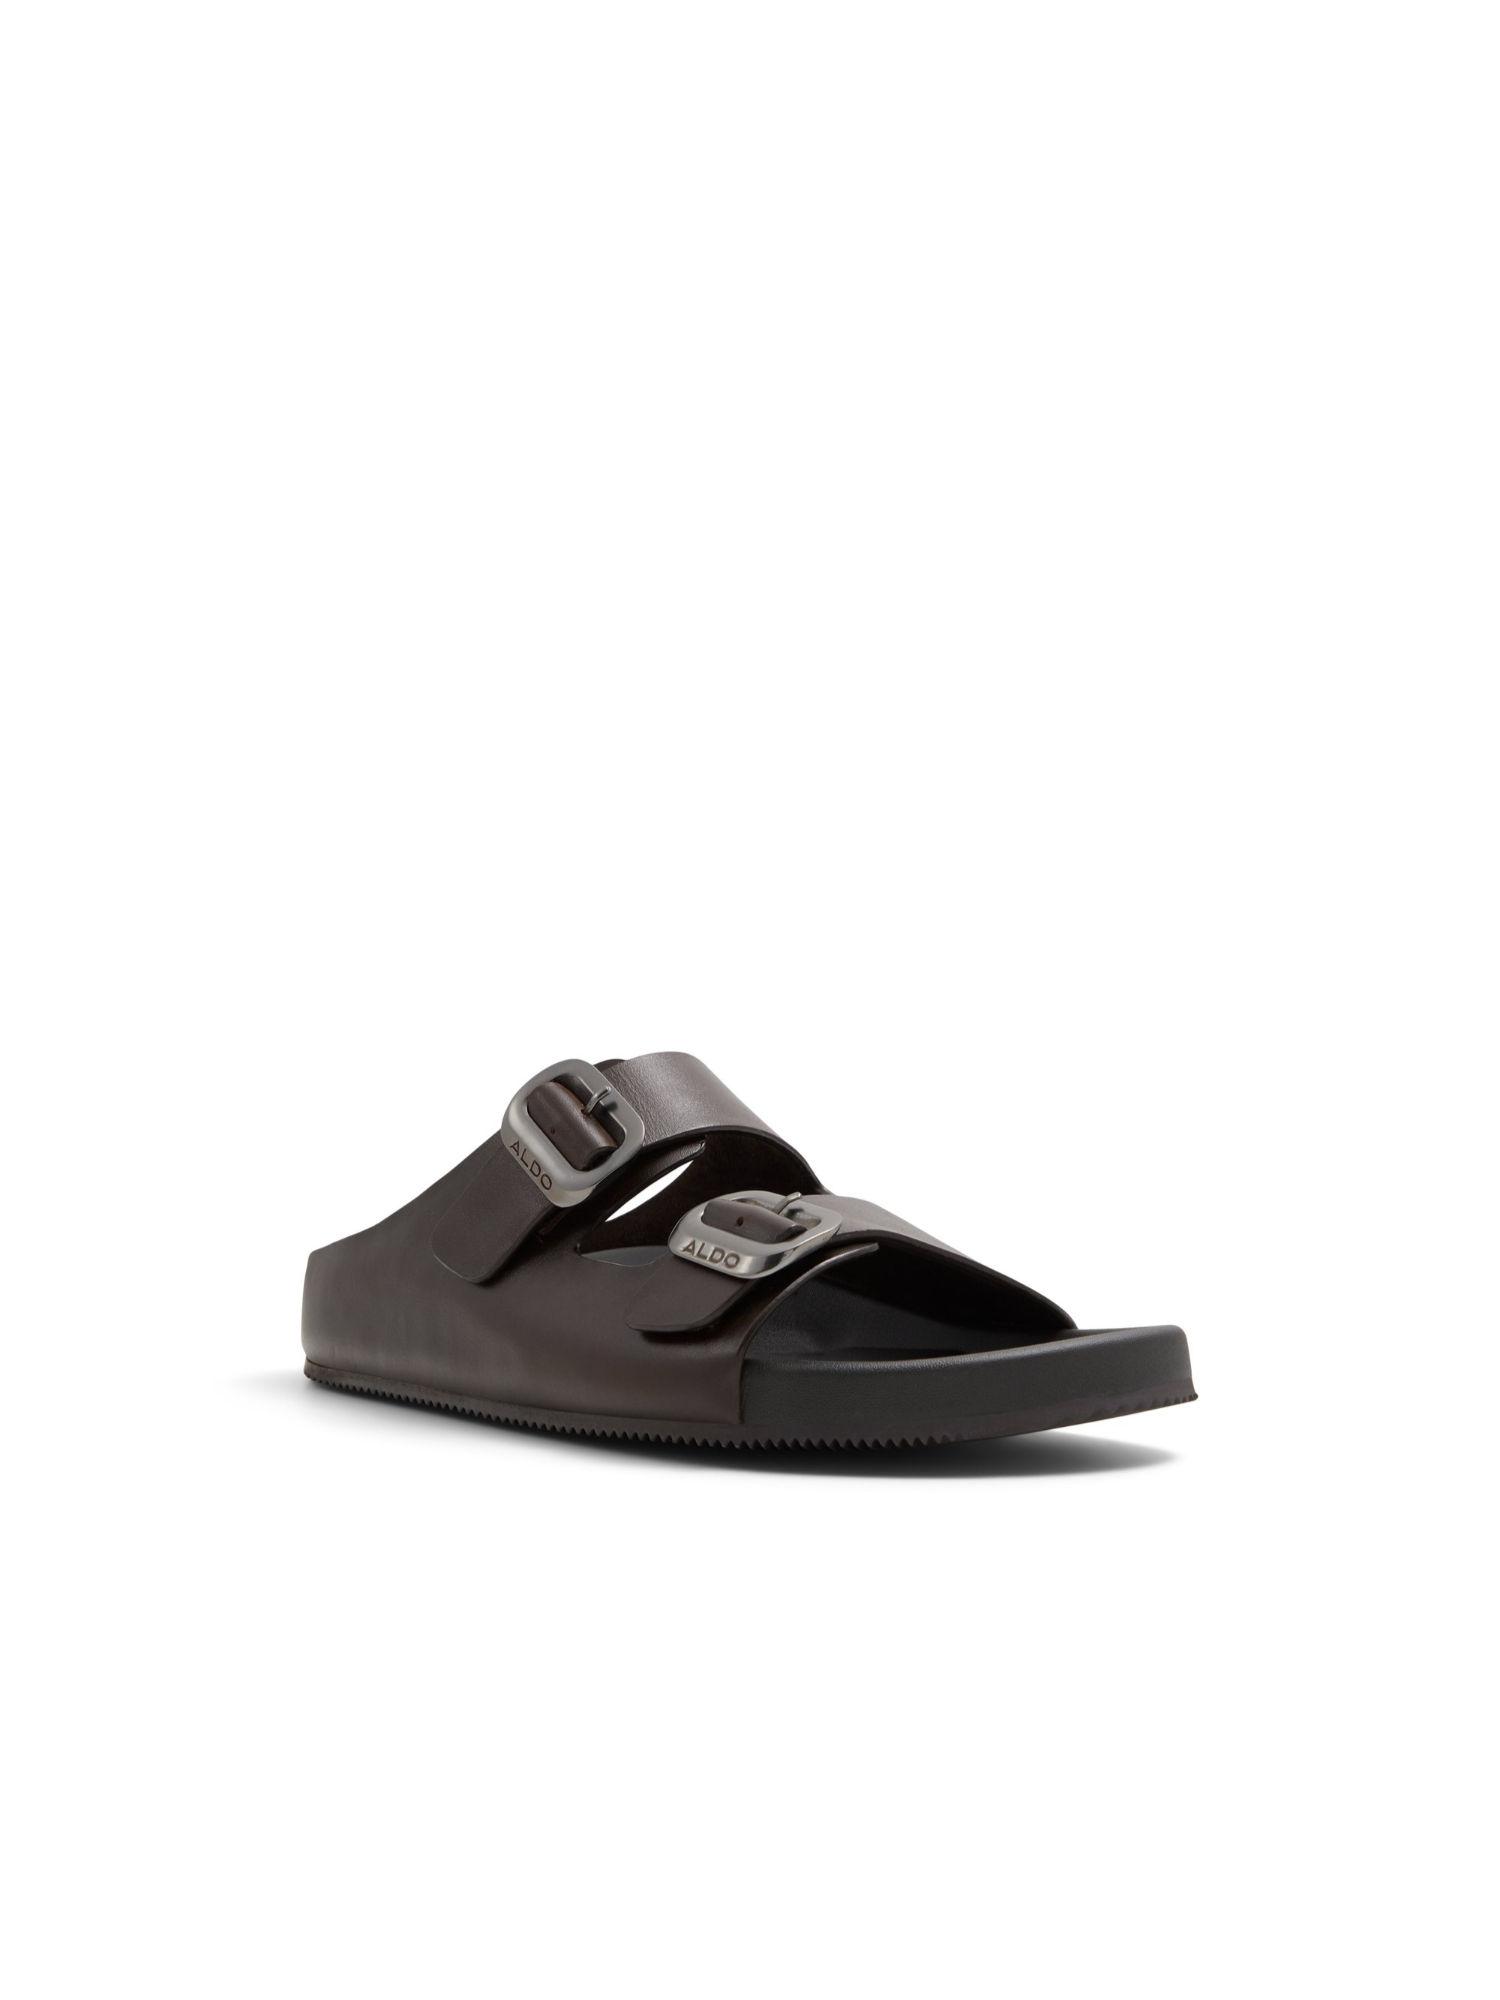 kennebunk-mens-brown-double-band-sliders